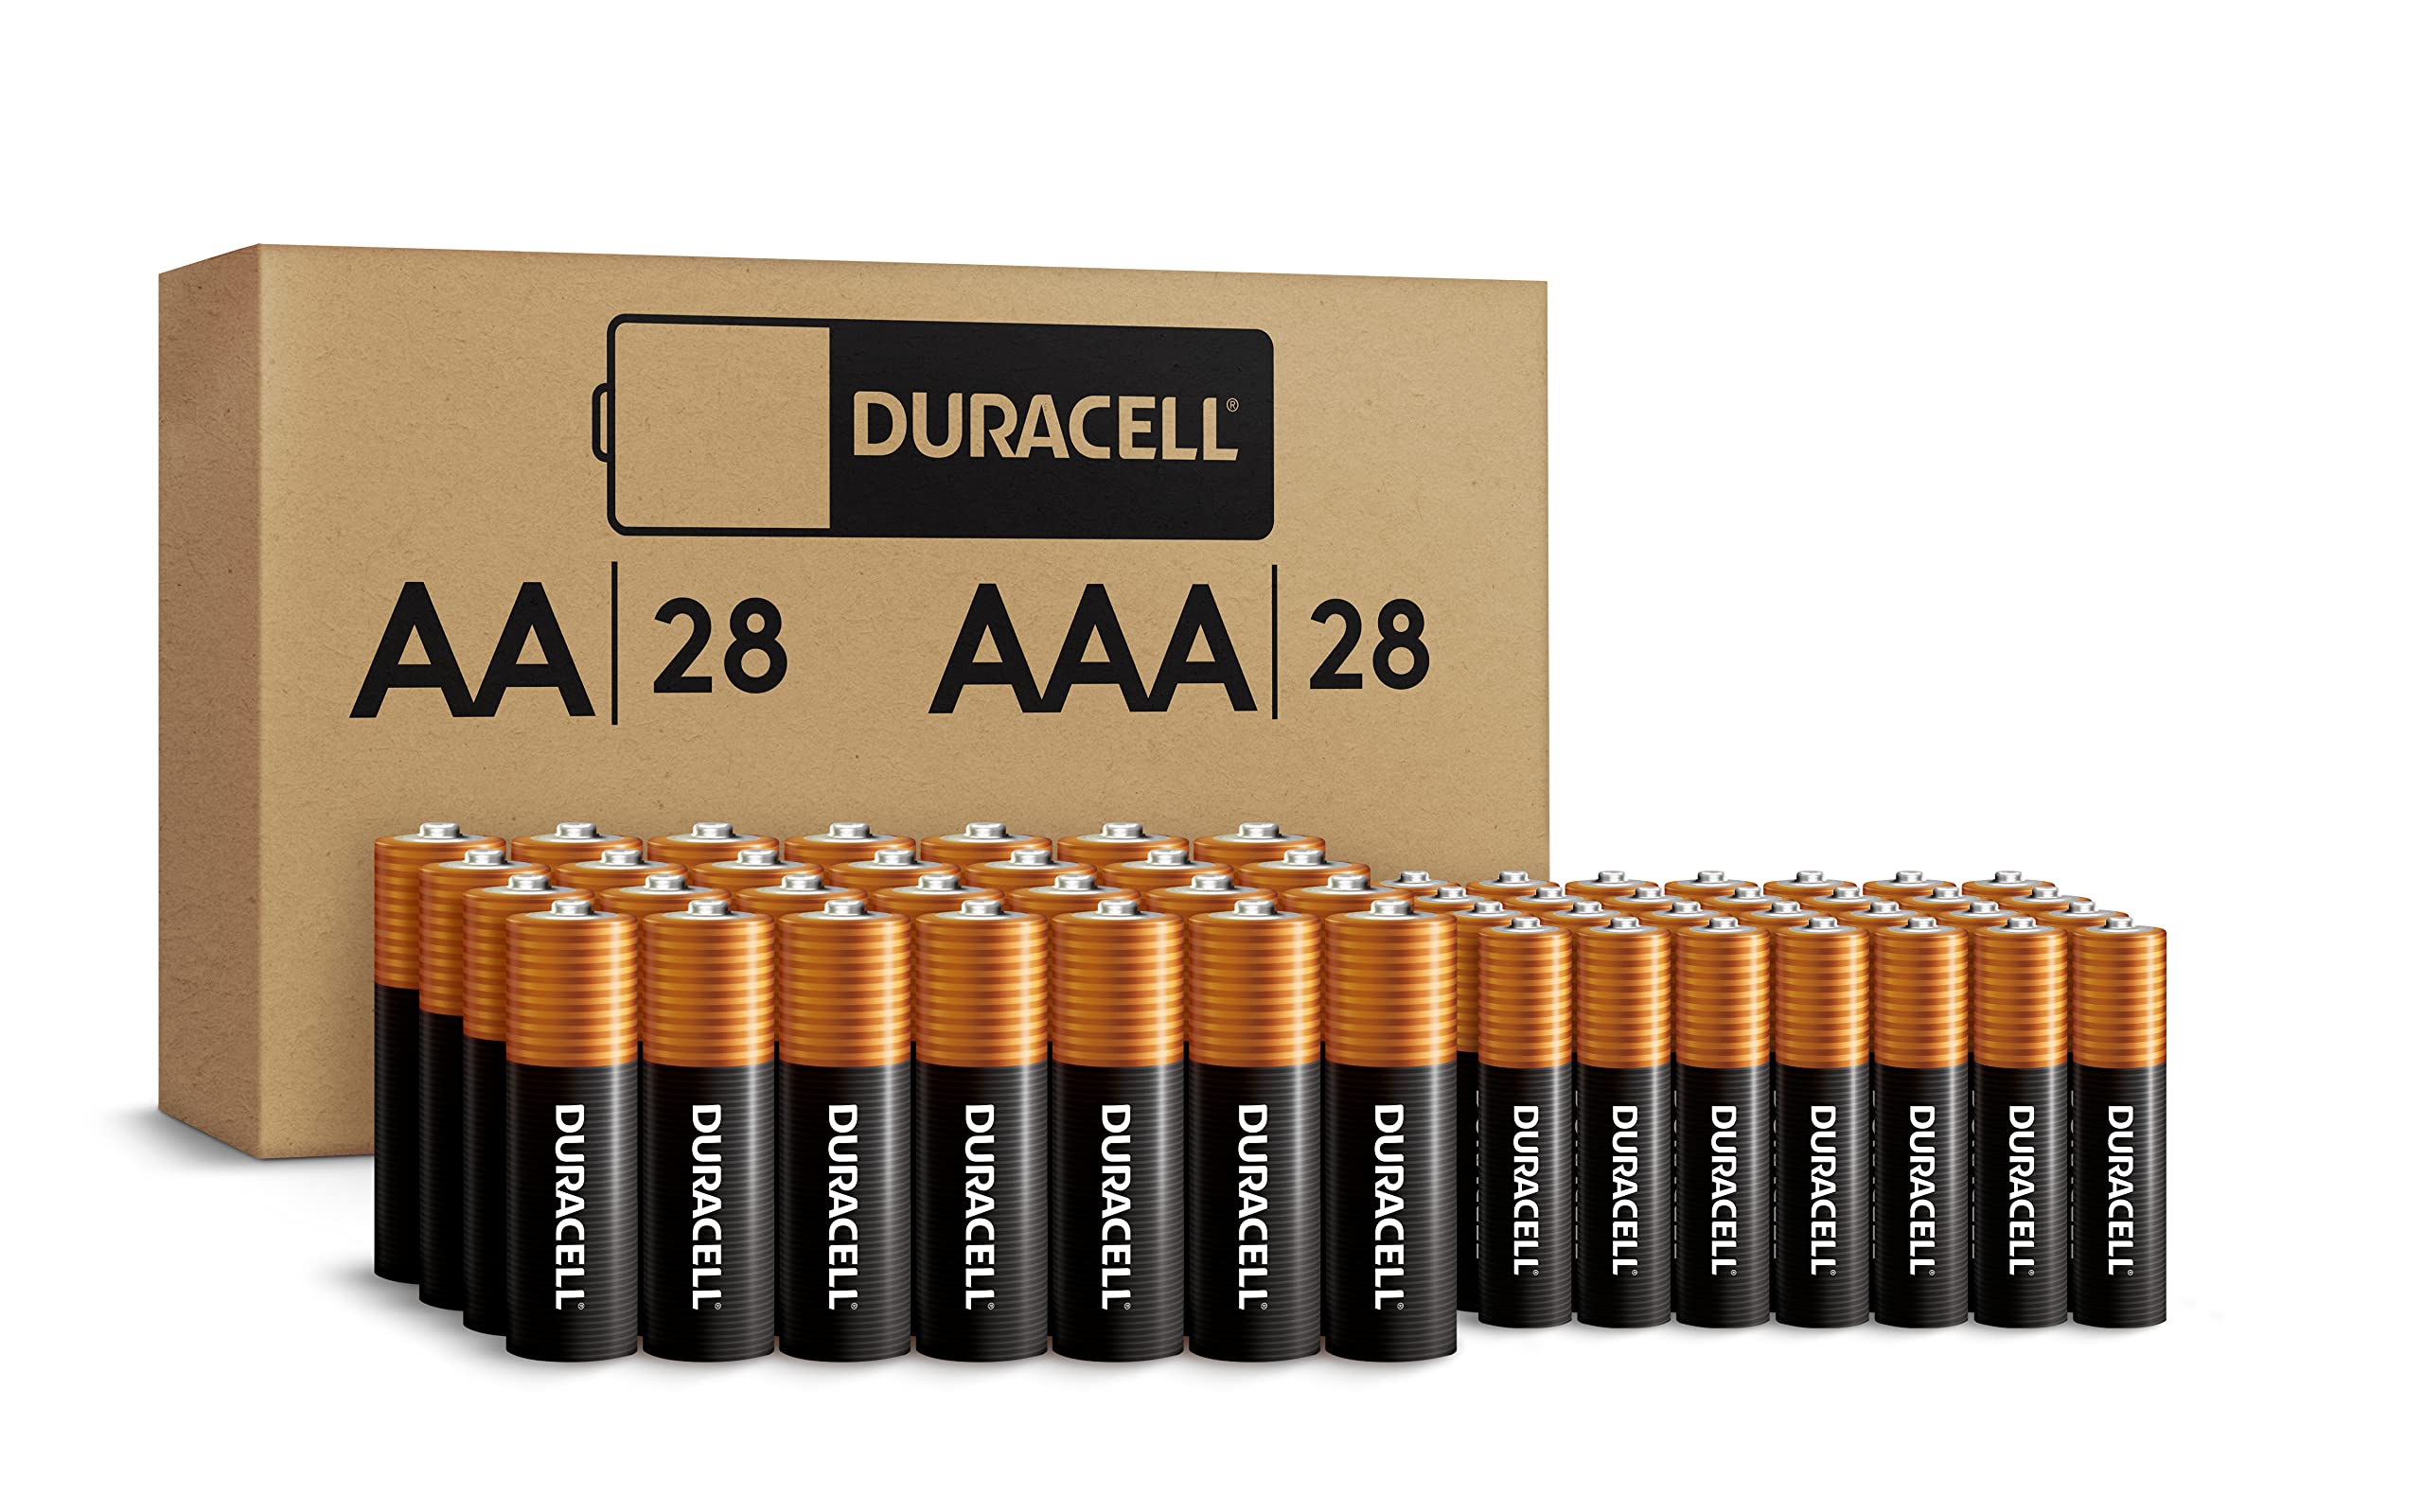 Duracell Coppertop AA + AAA Batteries, 56 Count Pack Double A and Triple A Alkaline Battery with Power Boost Ingredients, Long-lasting Power (Ecommerce Packaging)